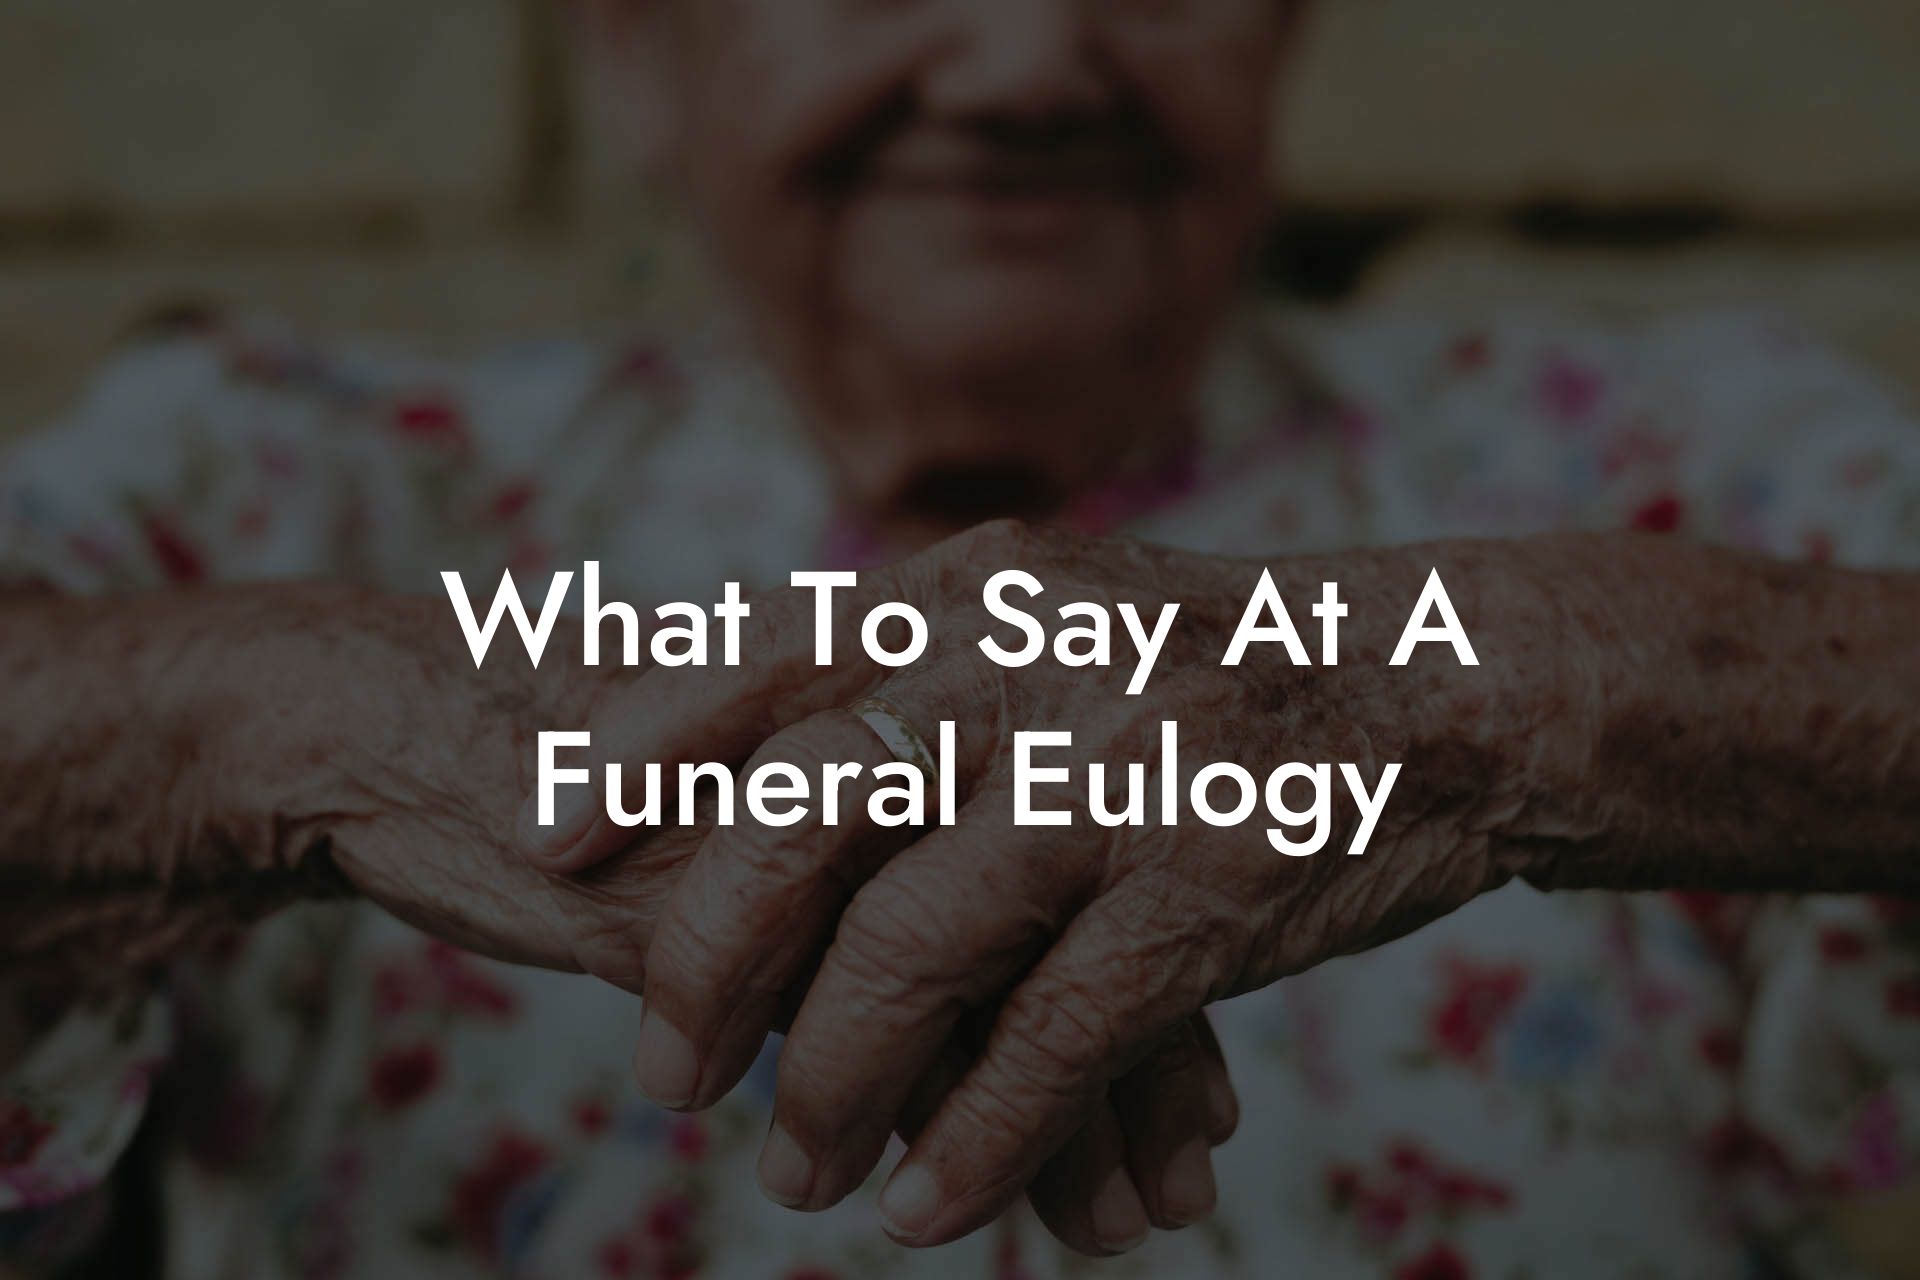 What To Say At A Funeral Eulogy